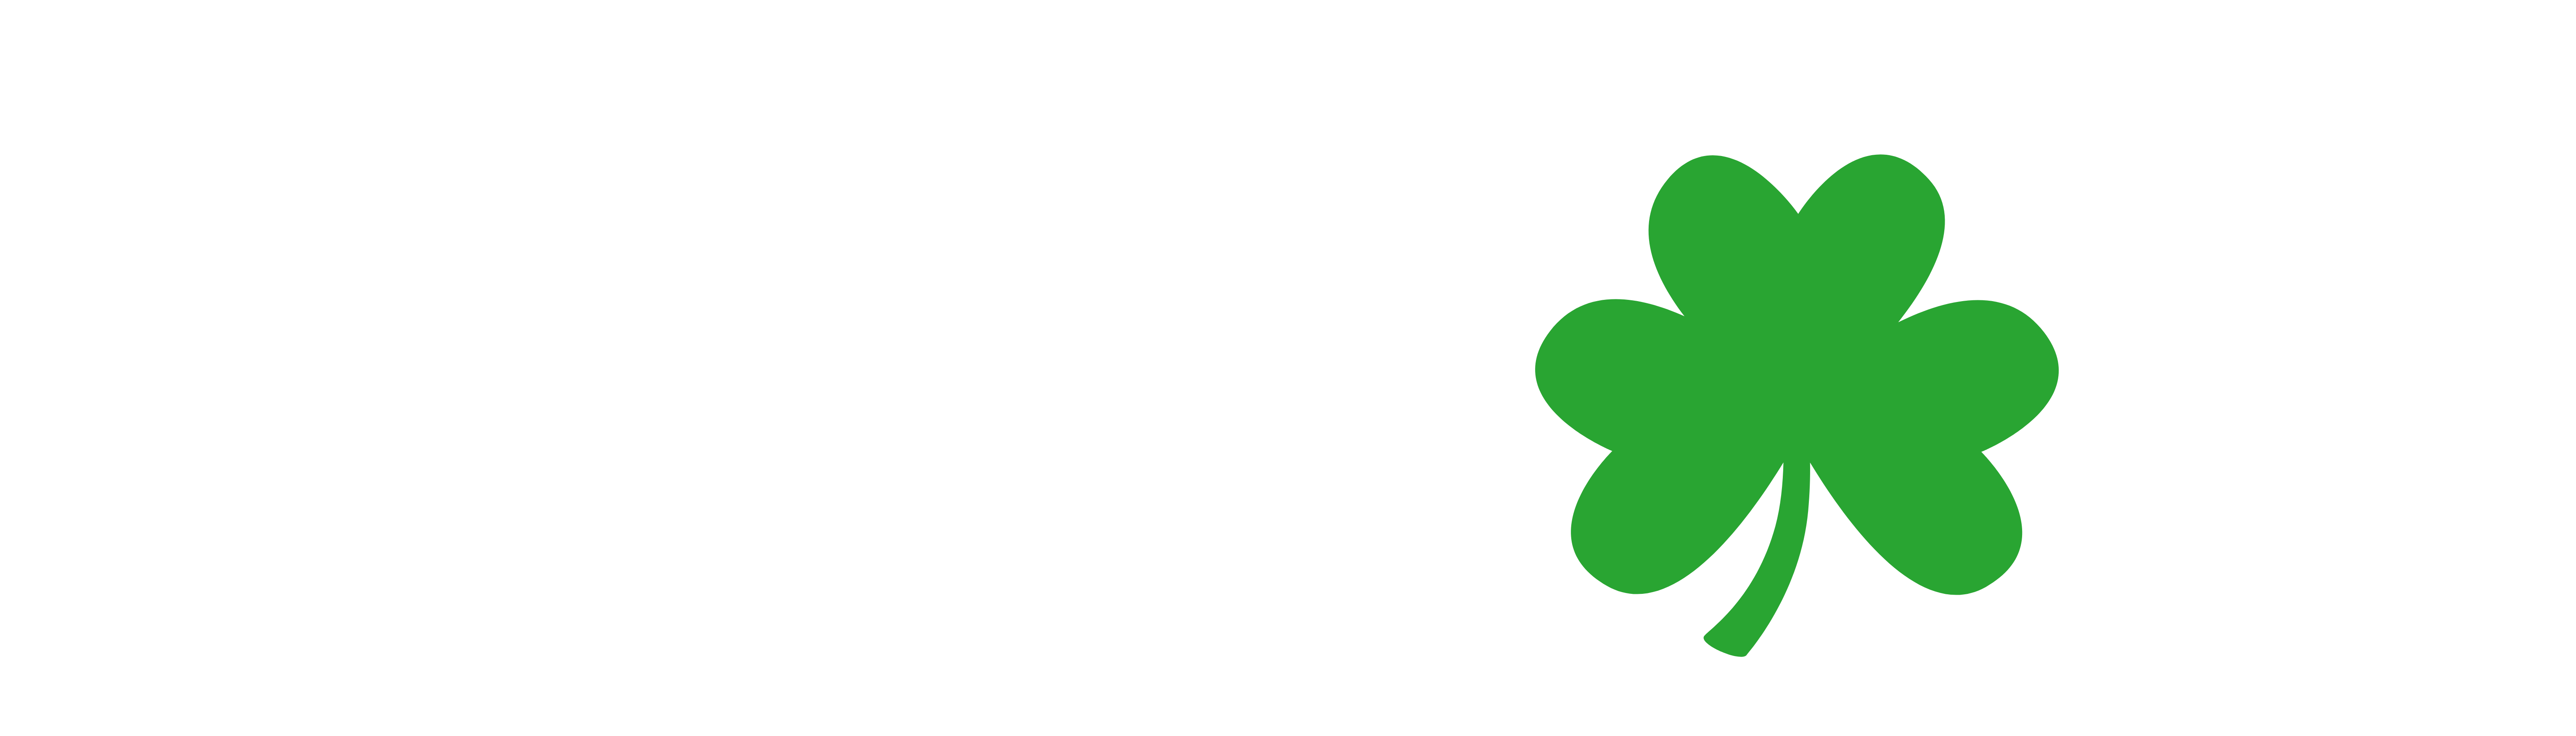 Sarsfields Virtual Pub. Give your opinions on whatever you wish.